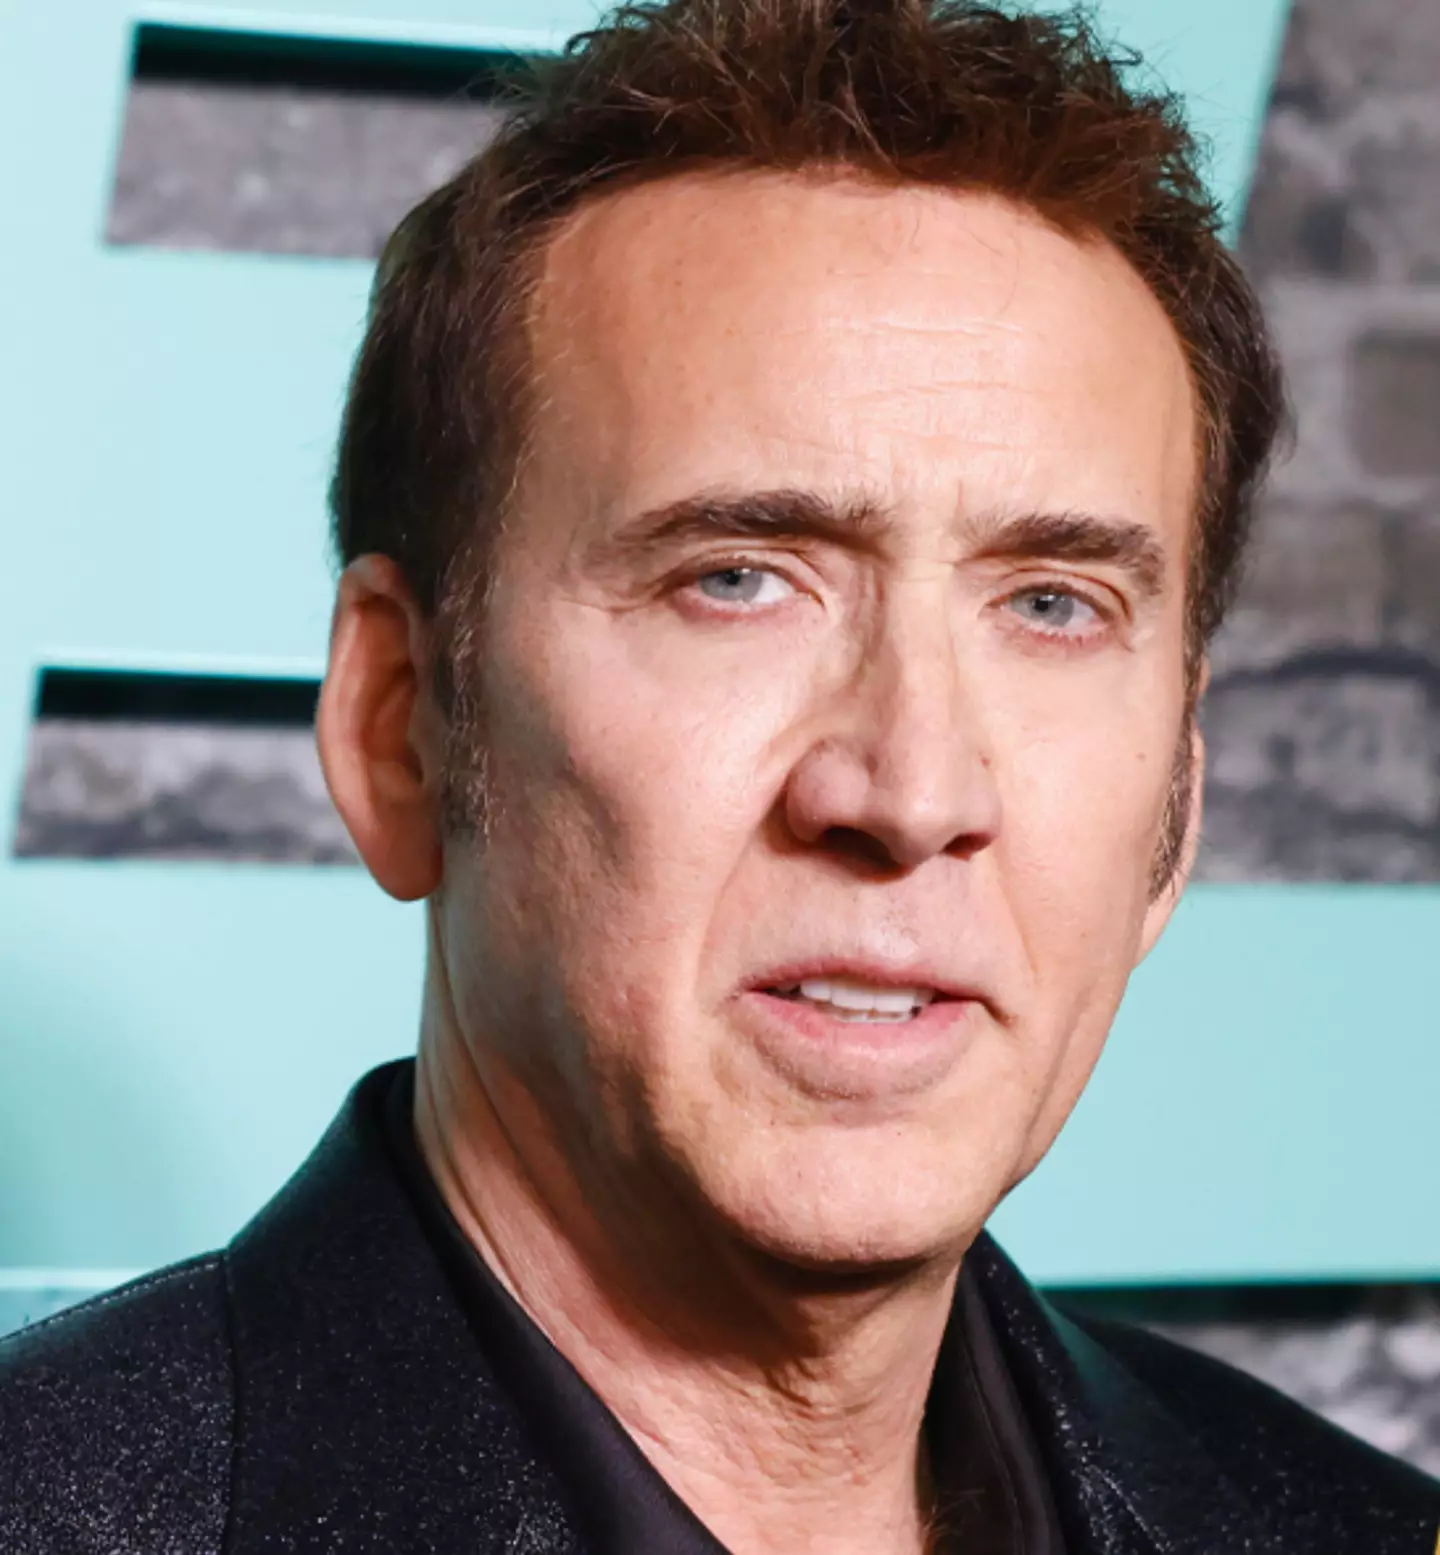 Cage's newest film also involves vampires.